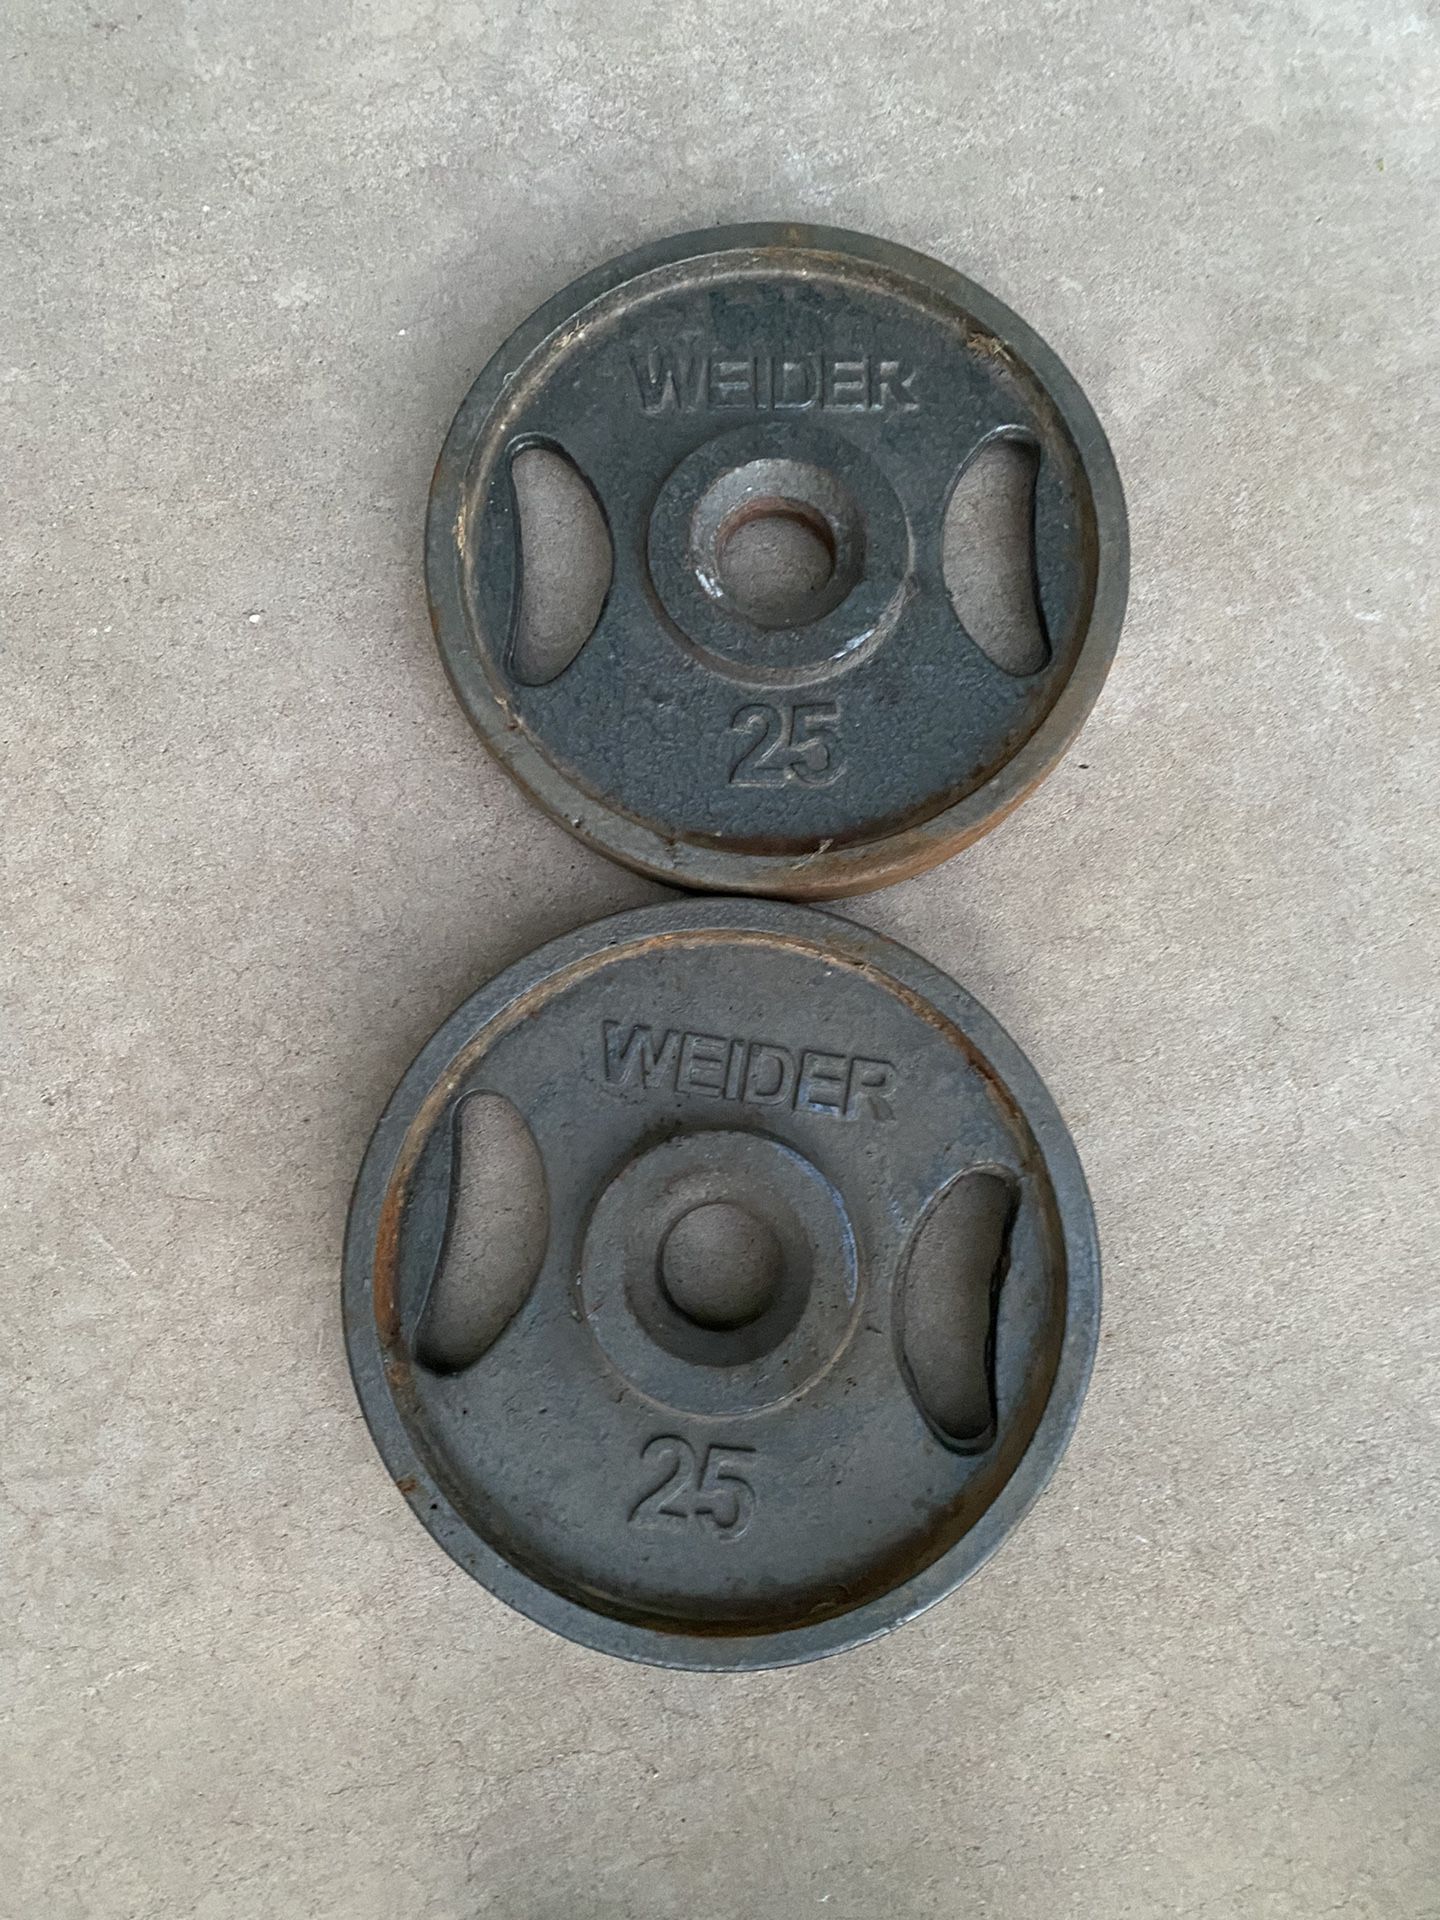 25lb Olympic Weight Plate Set 